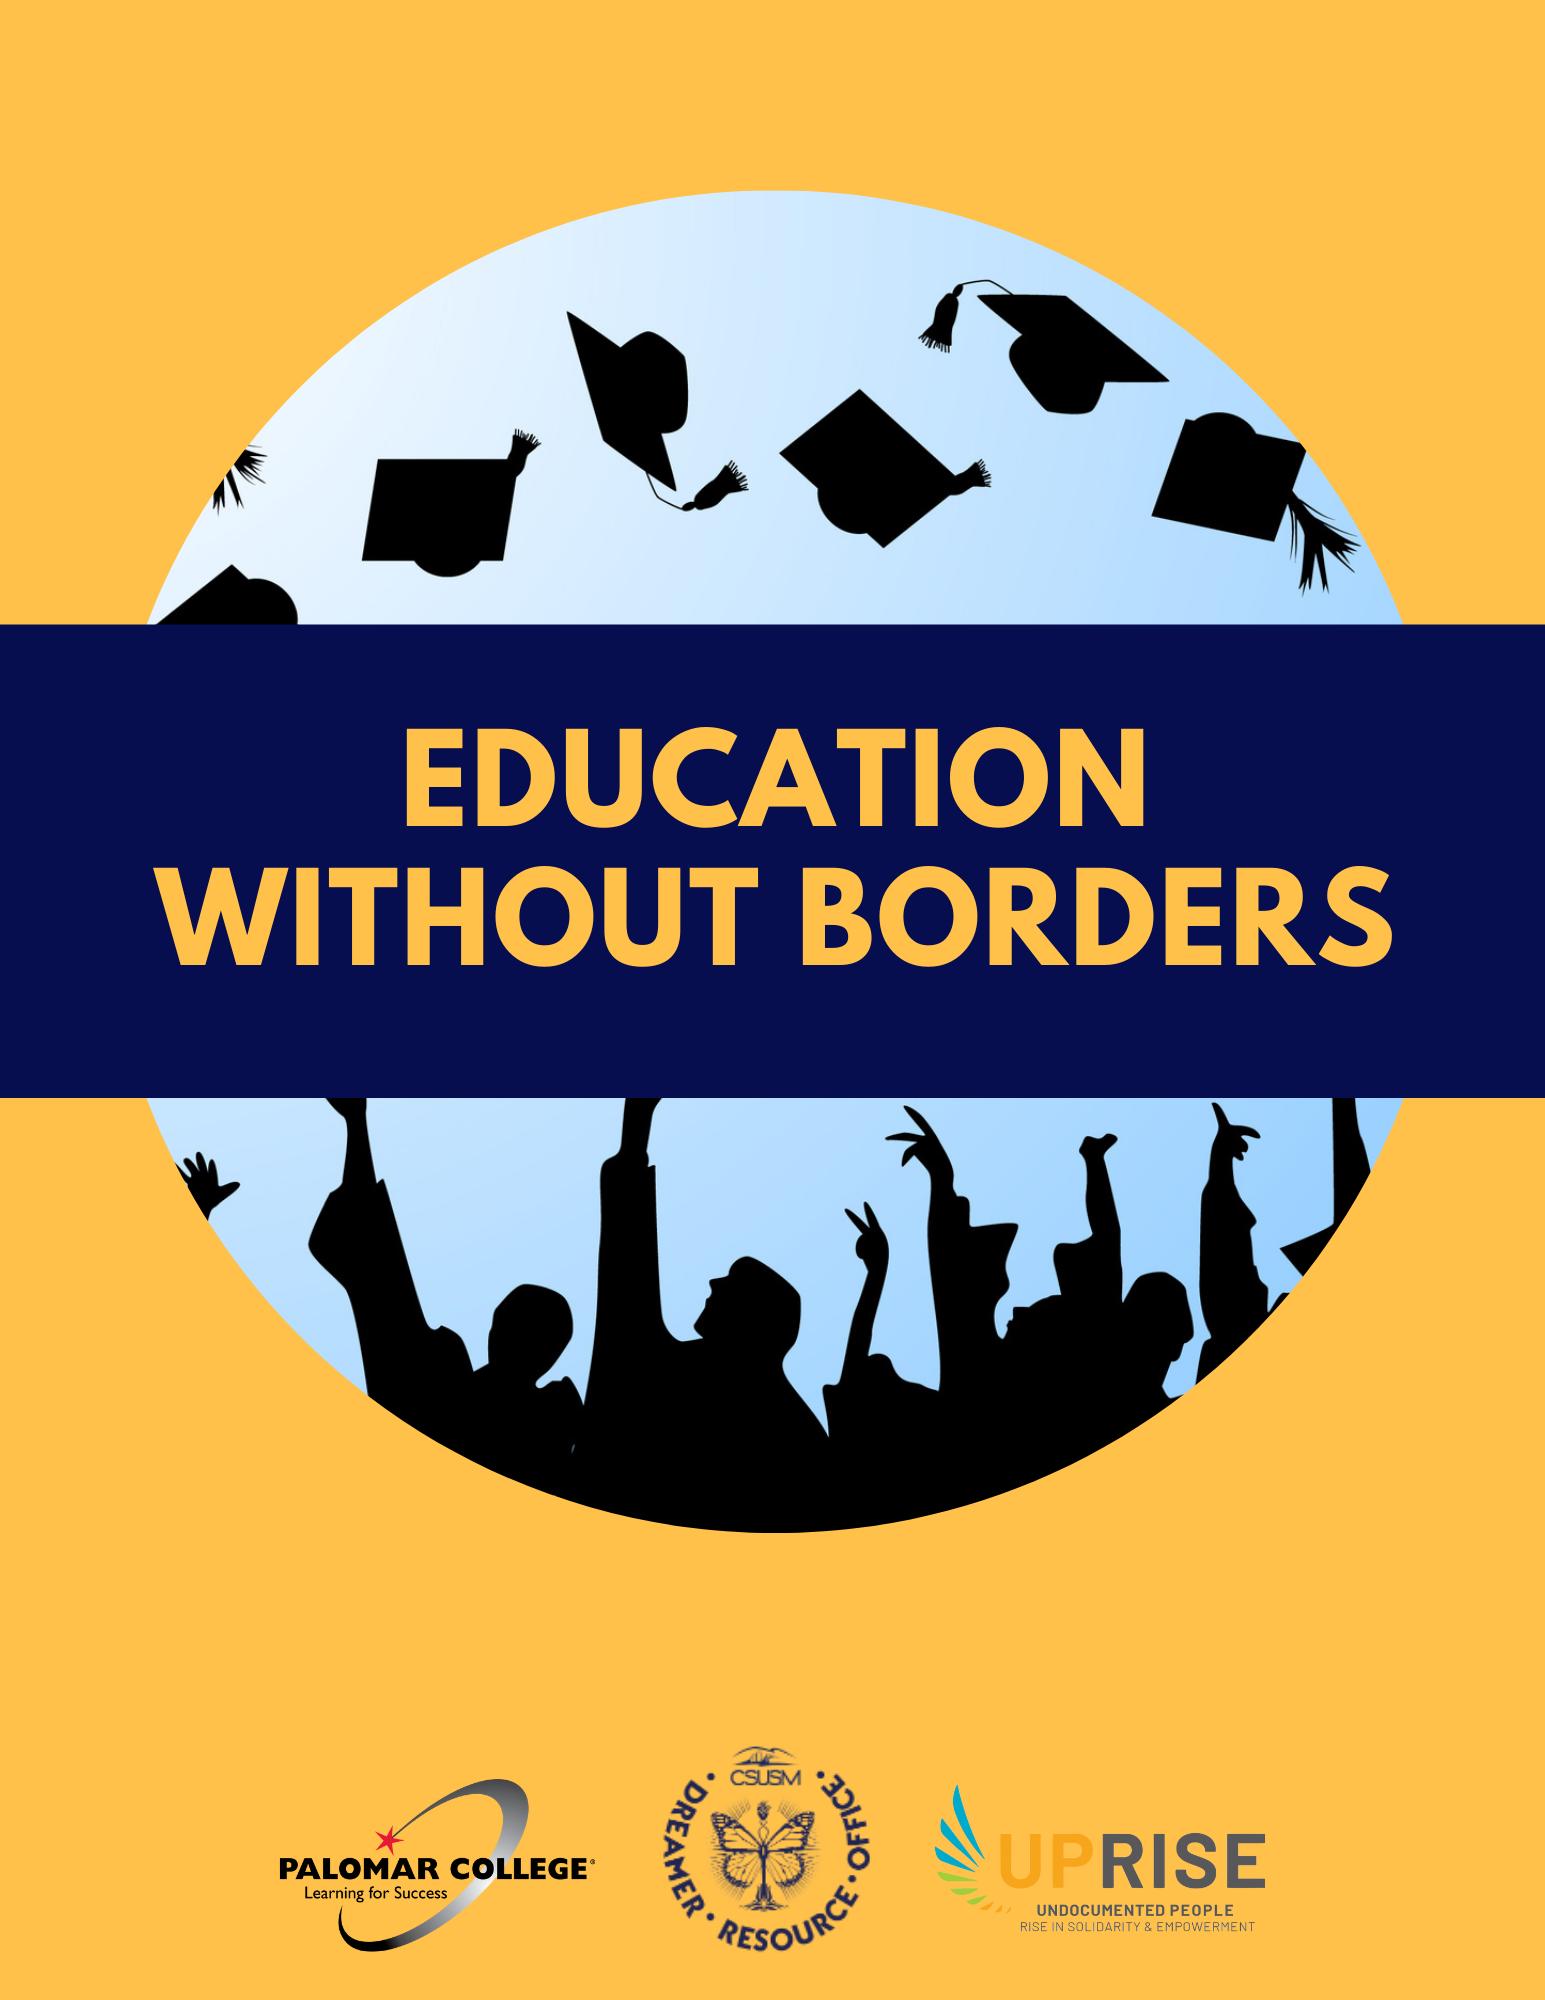 Education without borders image